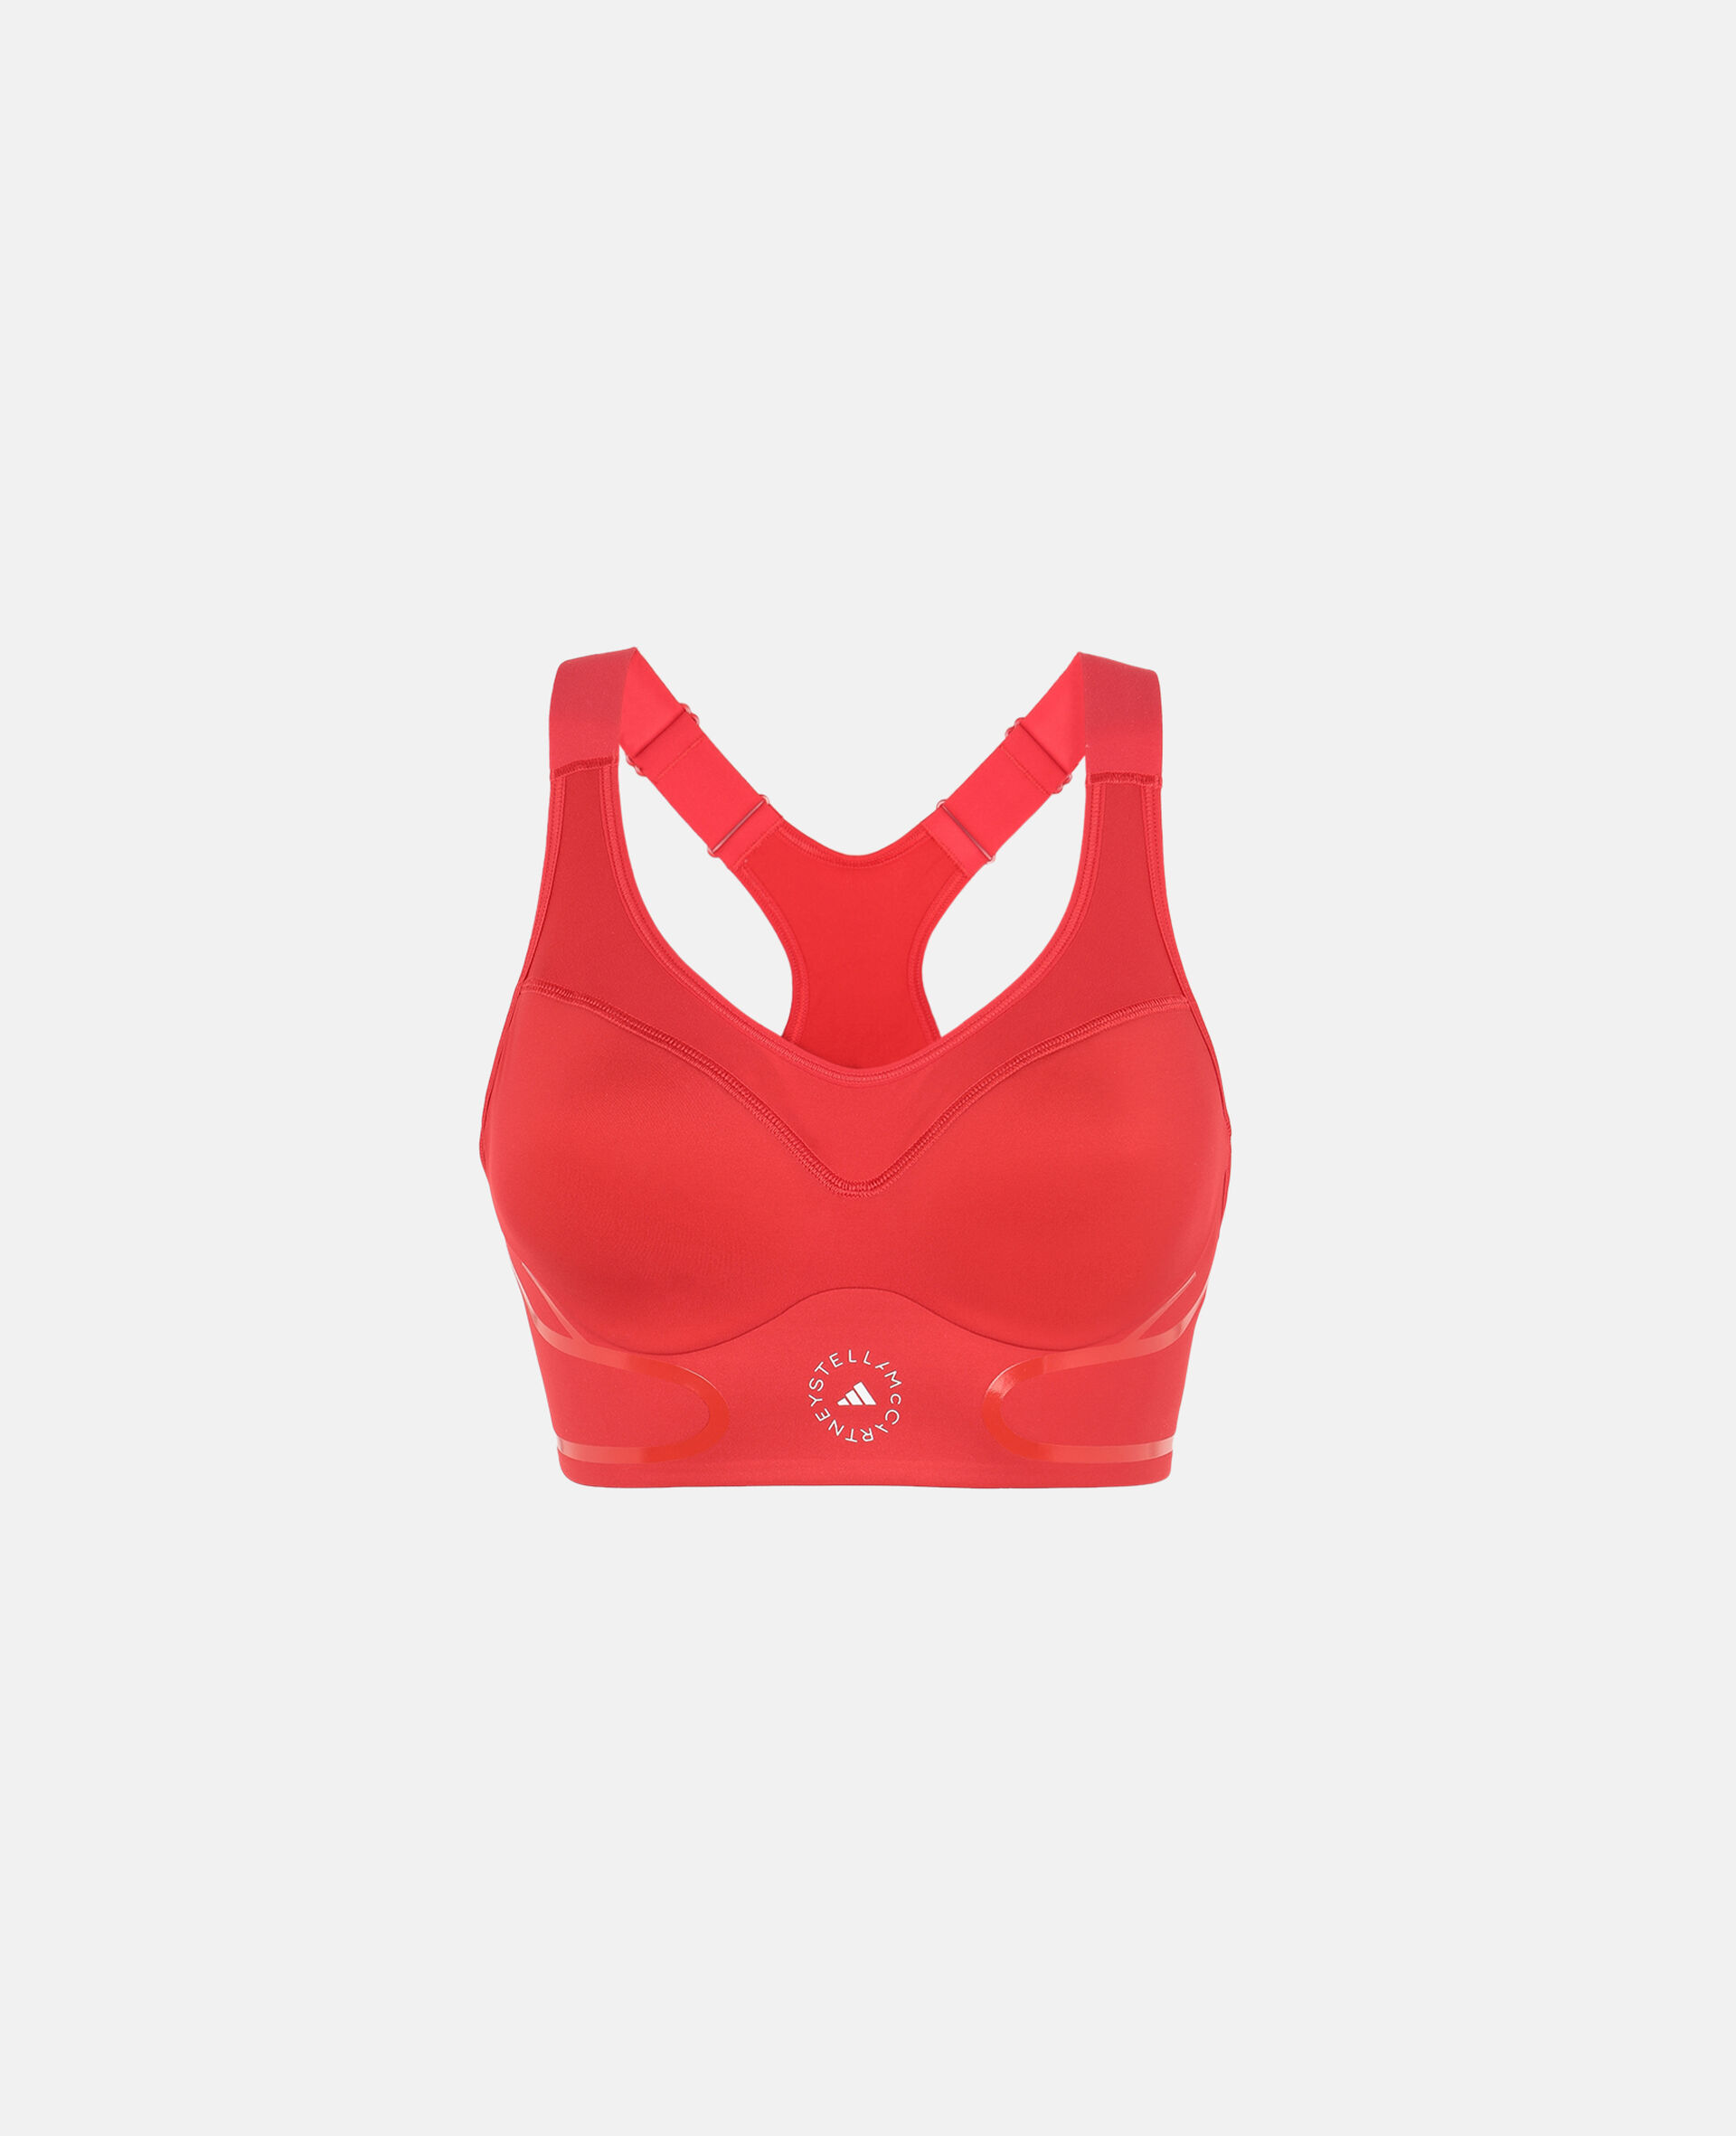 TruePace High-Impact Bra-Red-large image number 0